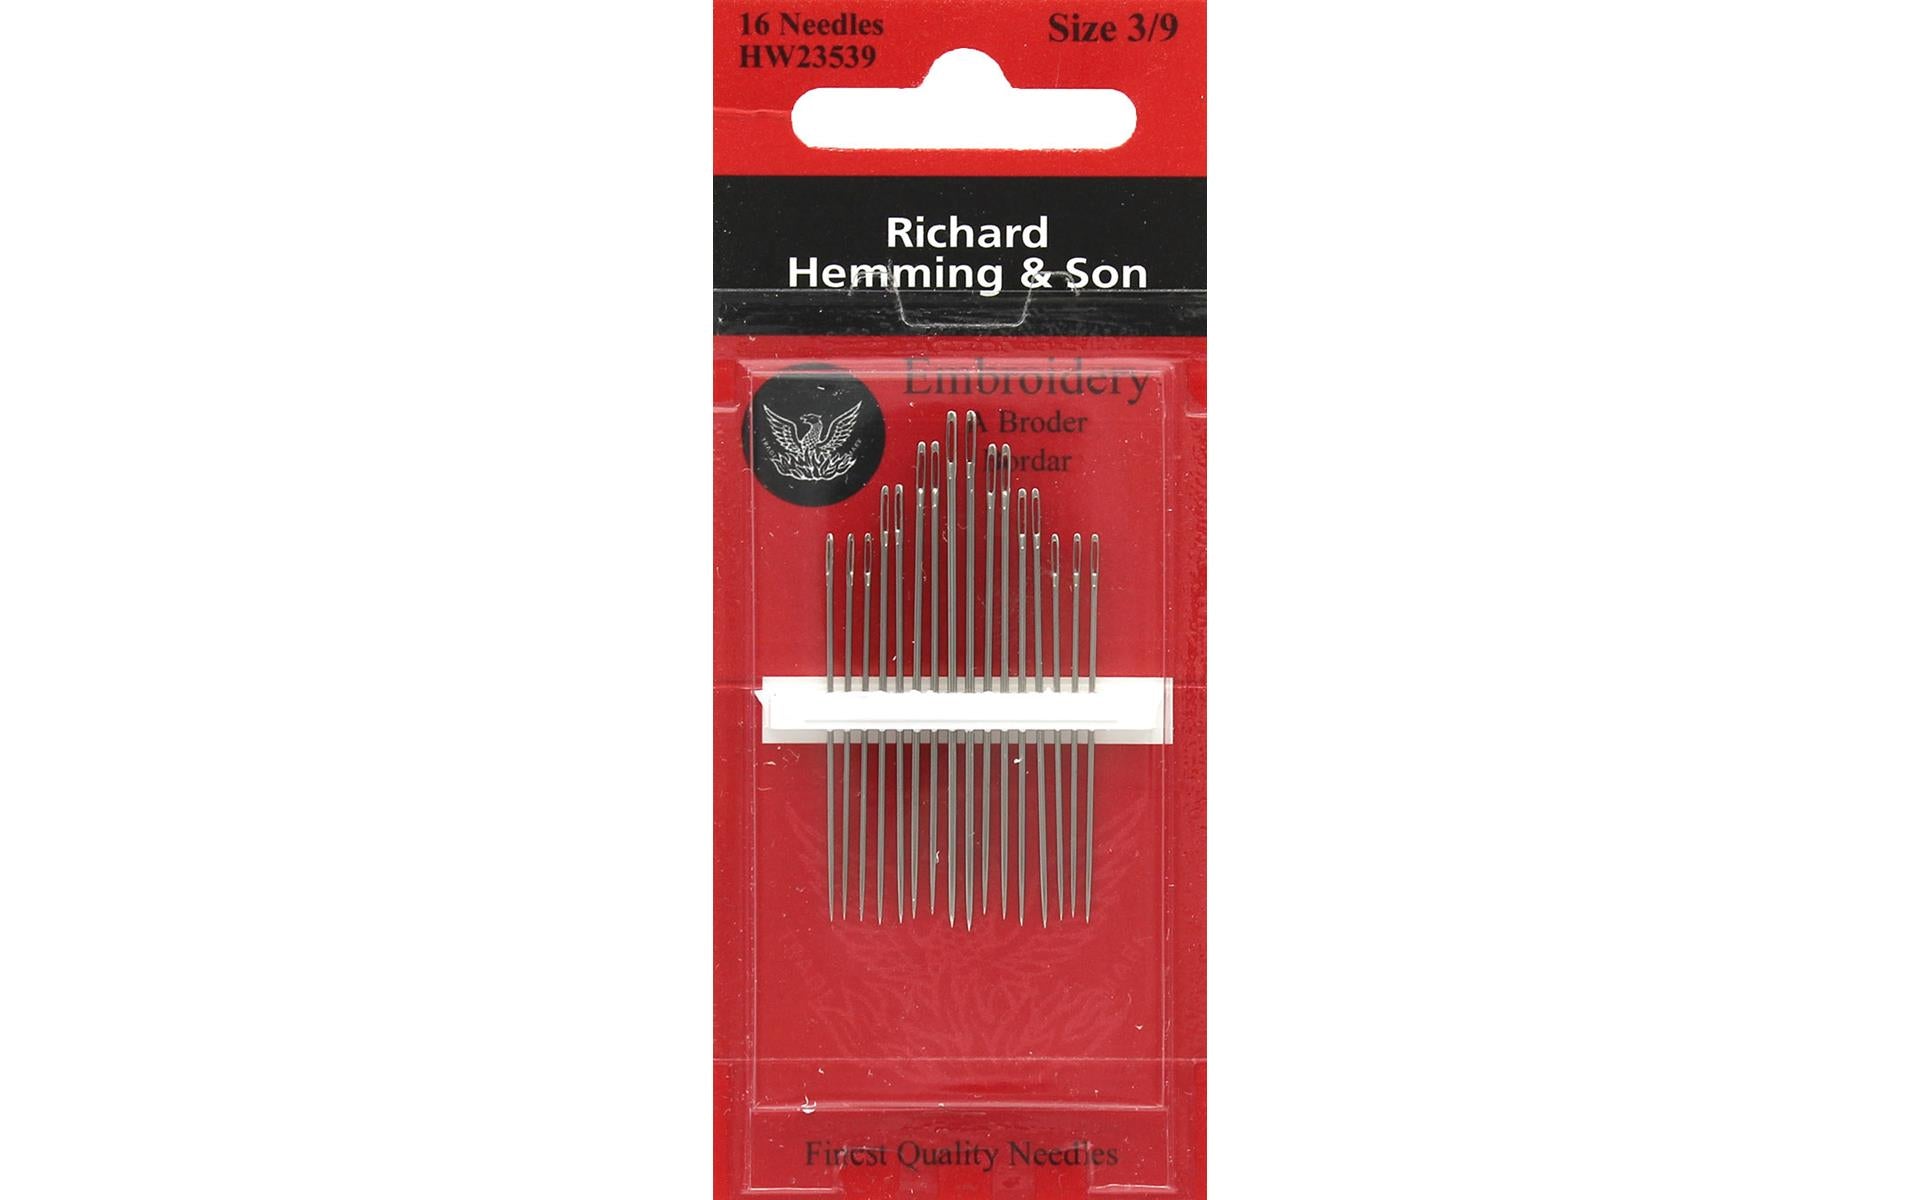 Crewel / Embroidery (Sizes: 3-9), Hand Sewing Needles by Richard Hemming & Son®